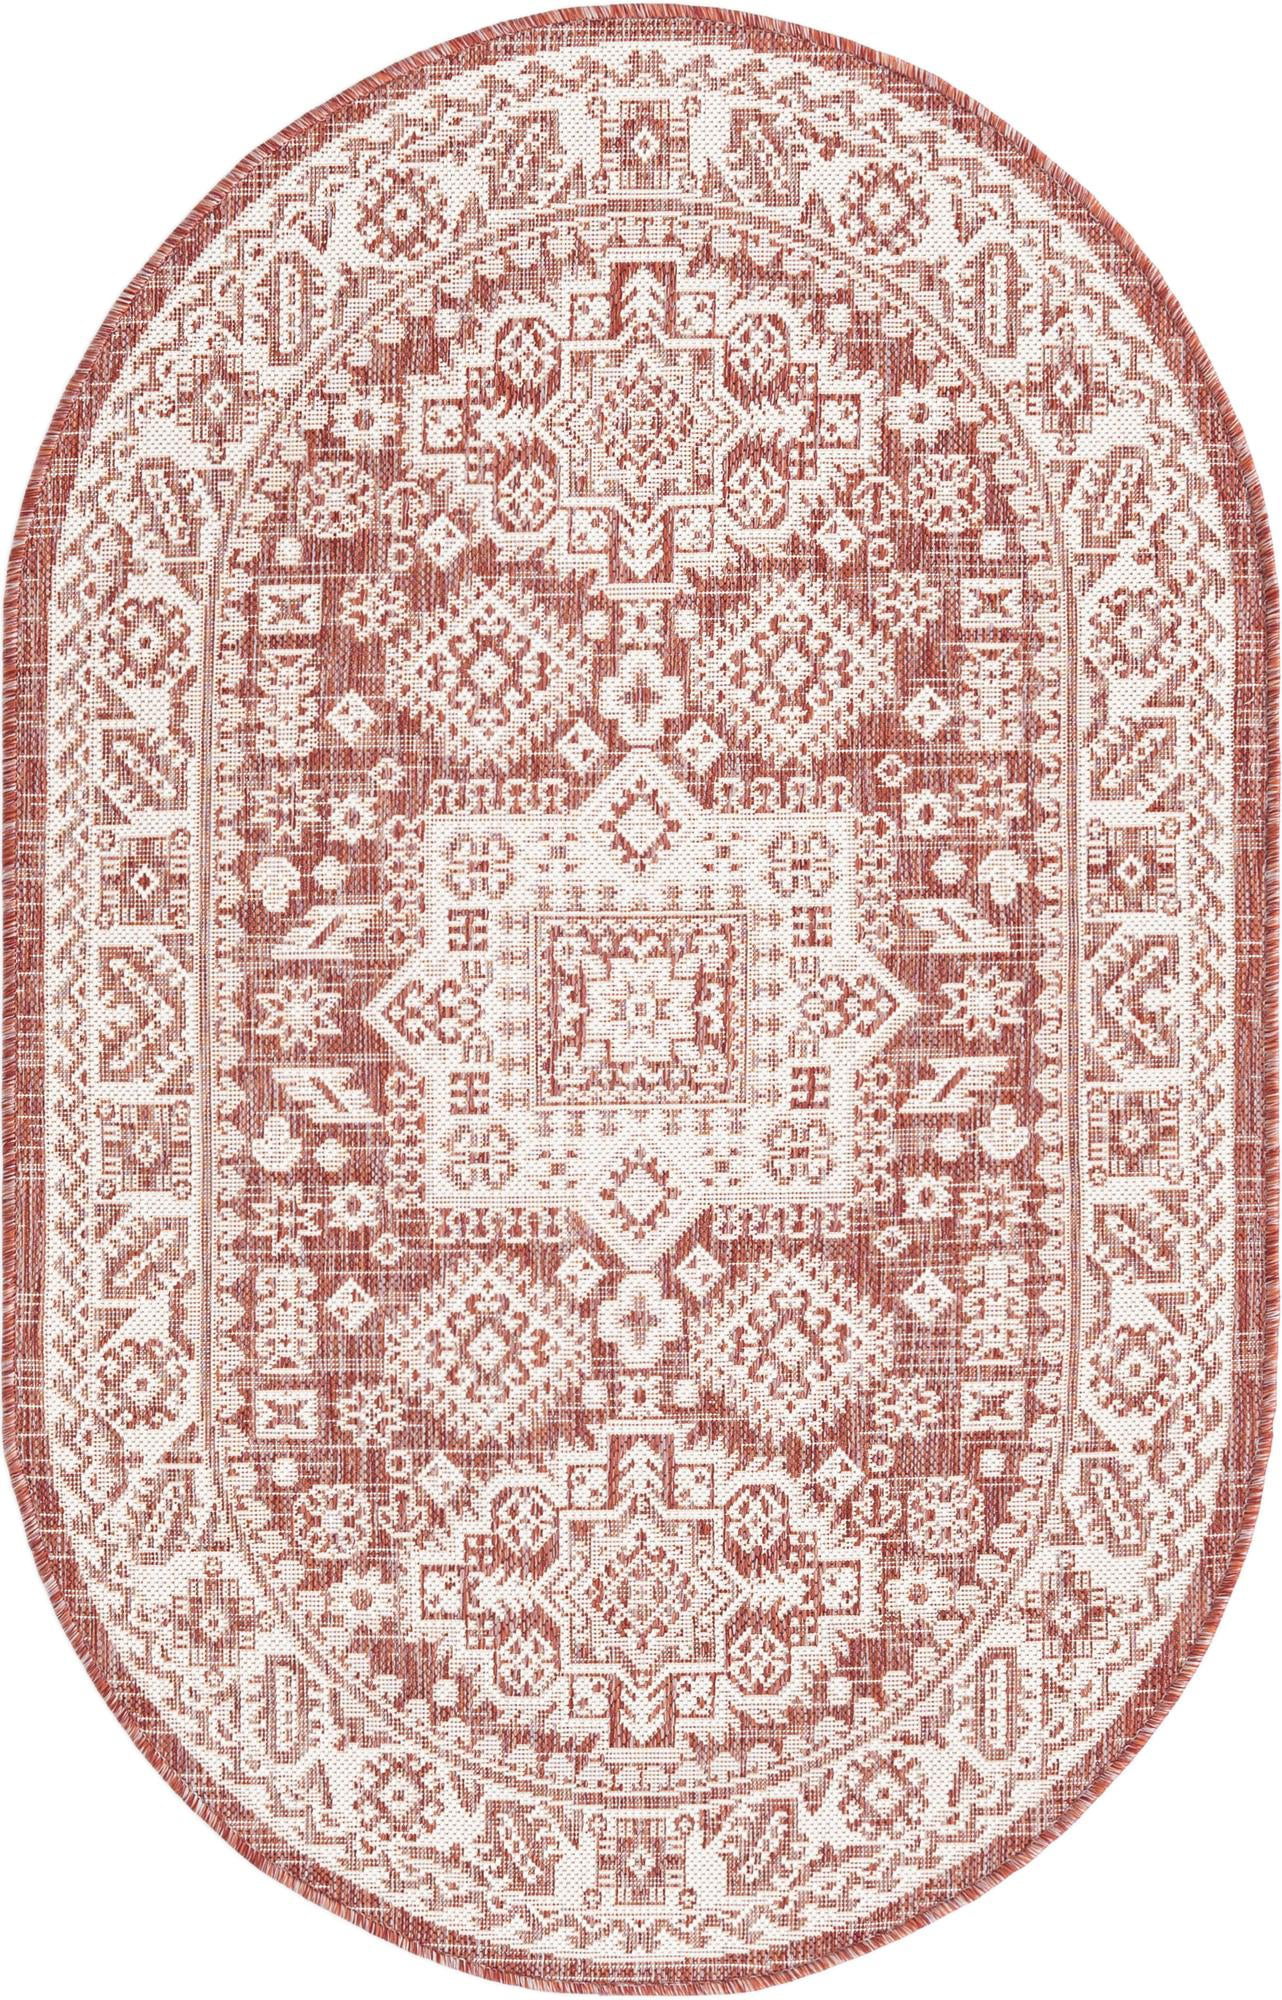 Rugs.com Outdoor Aztec Collection Rug Large Dining Rooms 4' x 6' Rust Red Flatweave Rug Perfect for Living Rooms Open Floorplans 